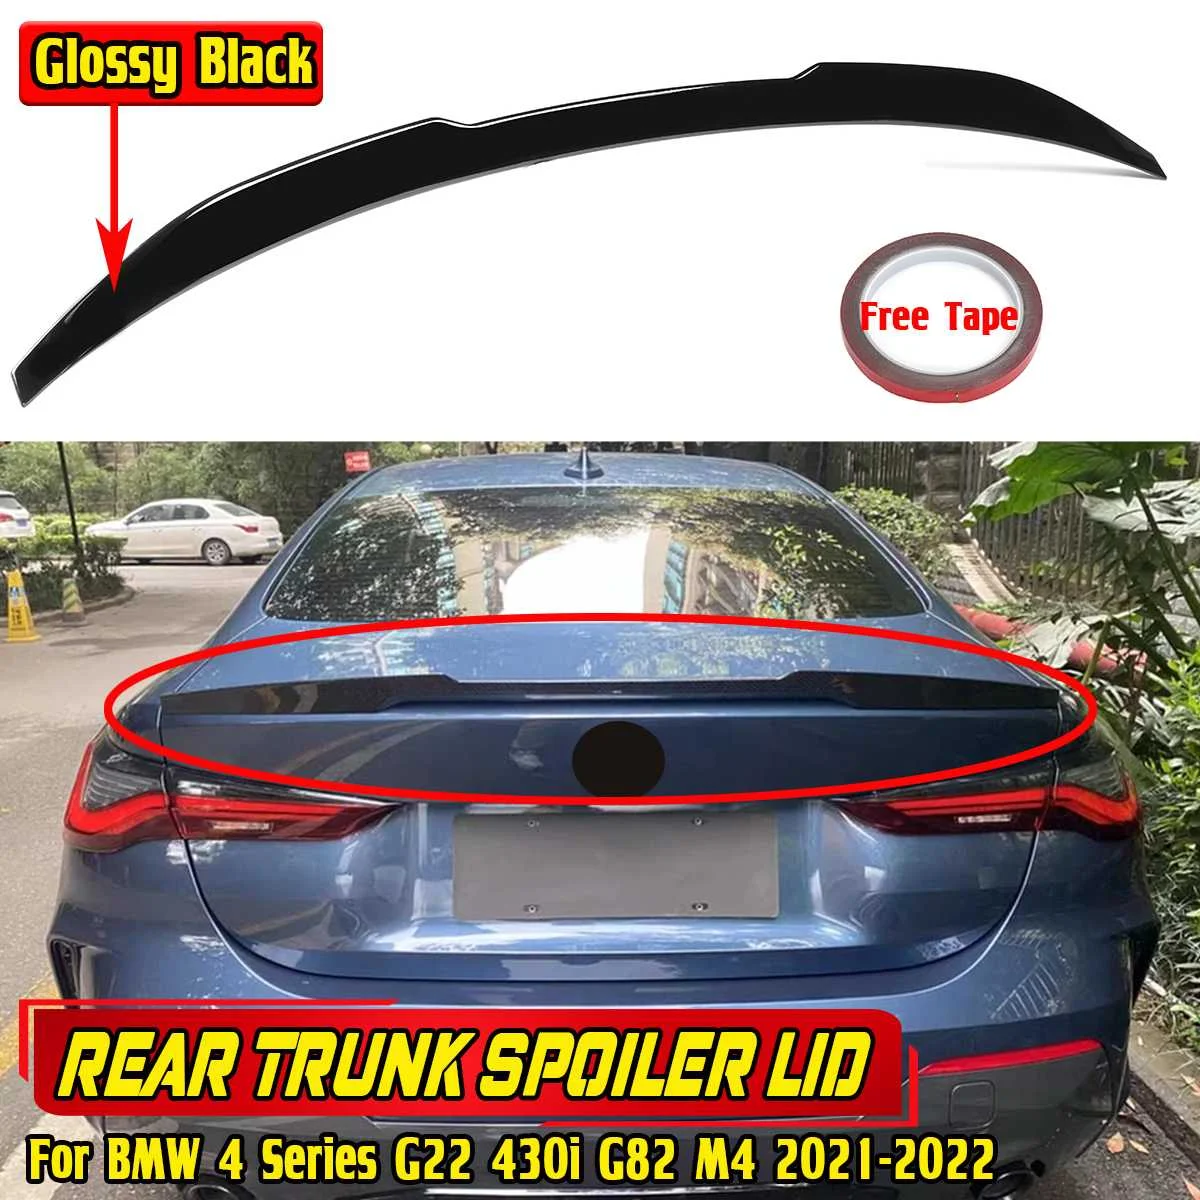 

G22 M4 Style Car Rear Trunk Spoiler Lip Boot Wing Lip For BMW 4 Series G22 430i G82 M4 2021-2022 Car Rear Roof Lip Spoiler